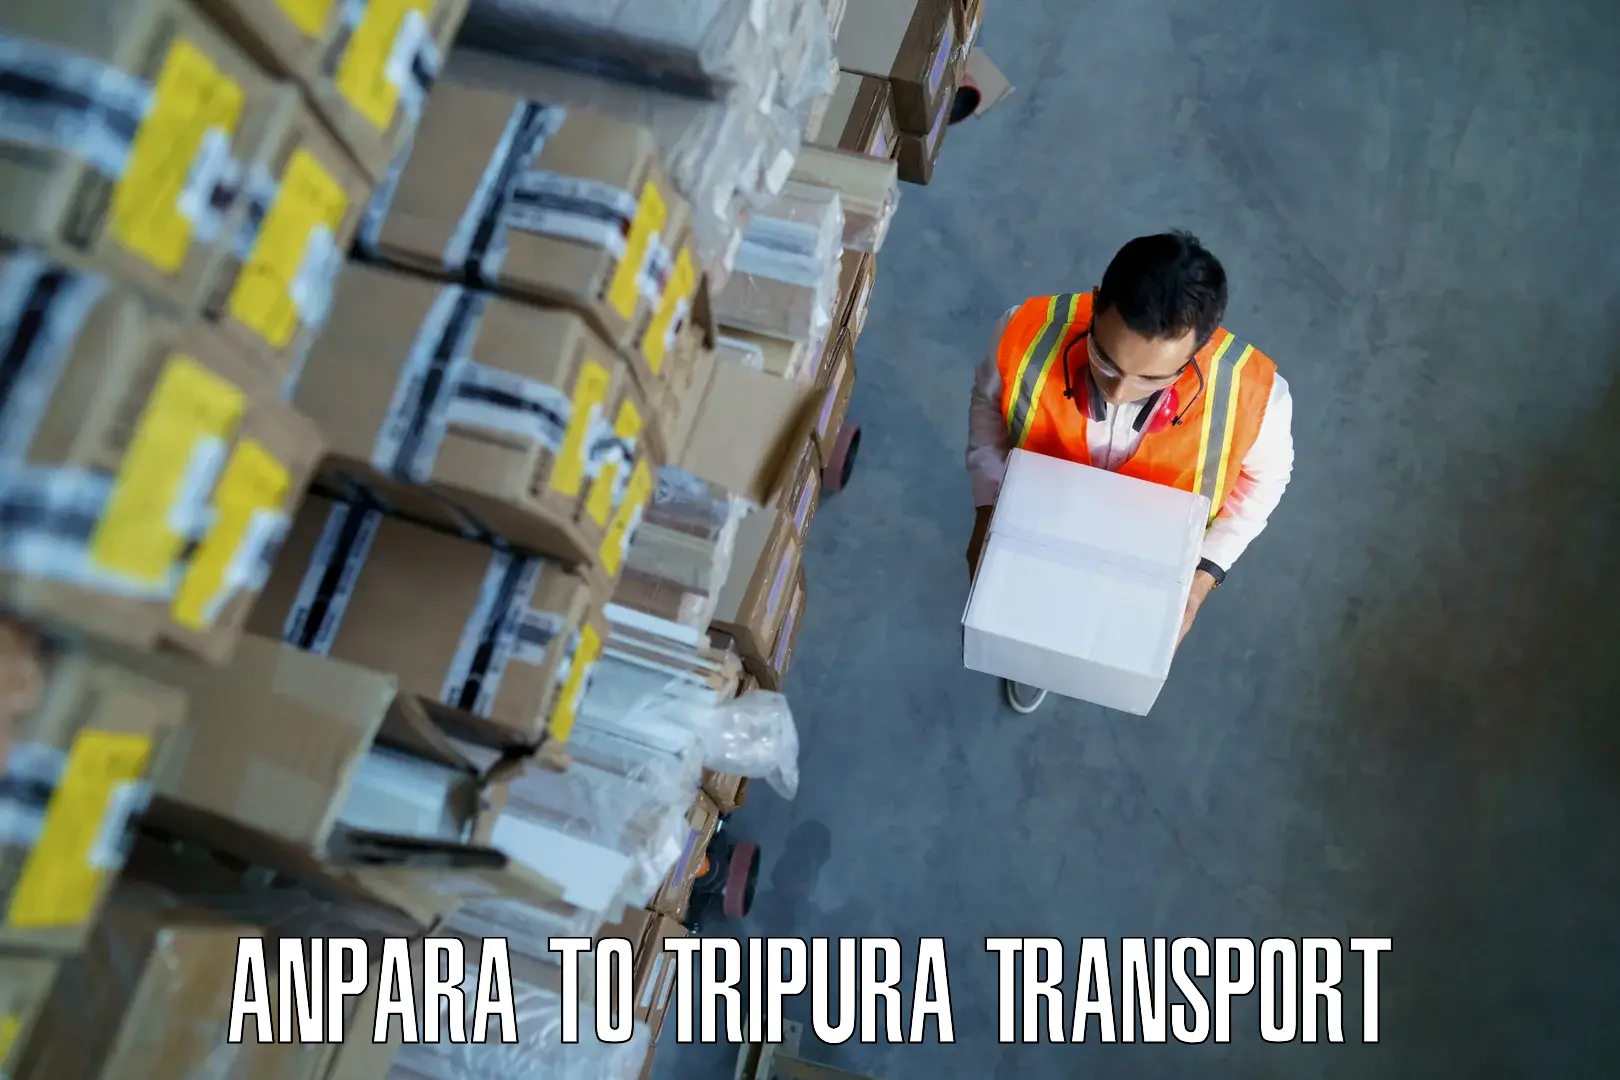 Express transport services Anpara to North Tripura